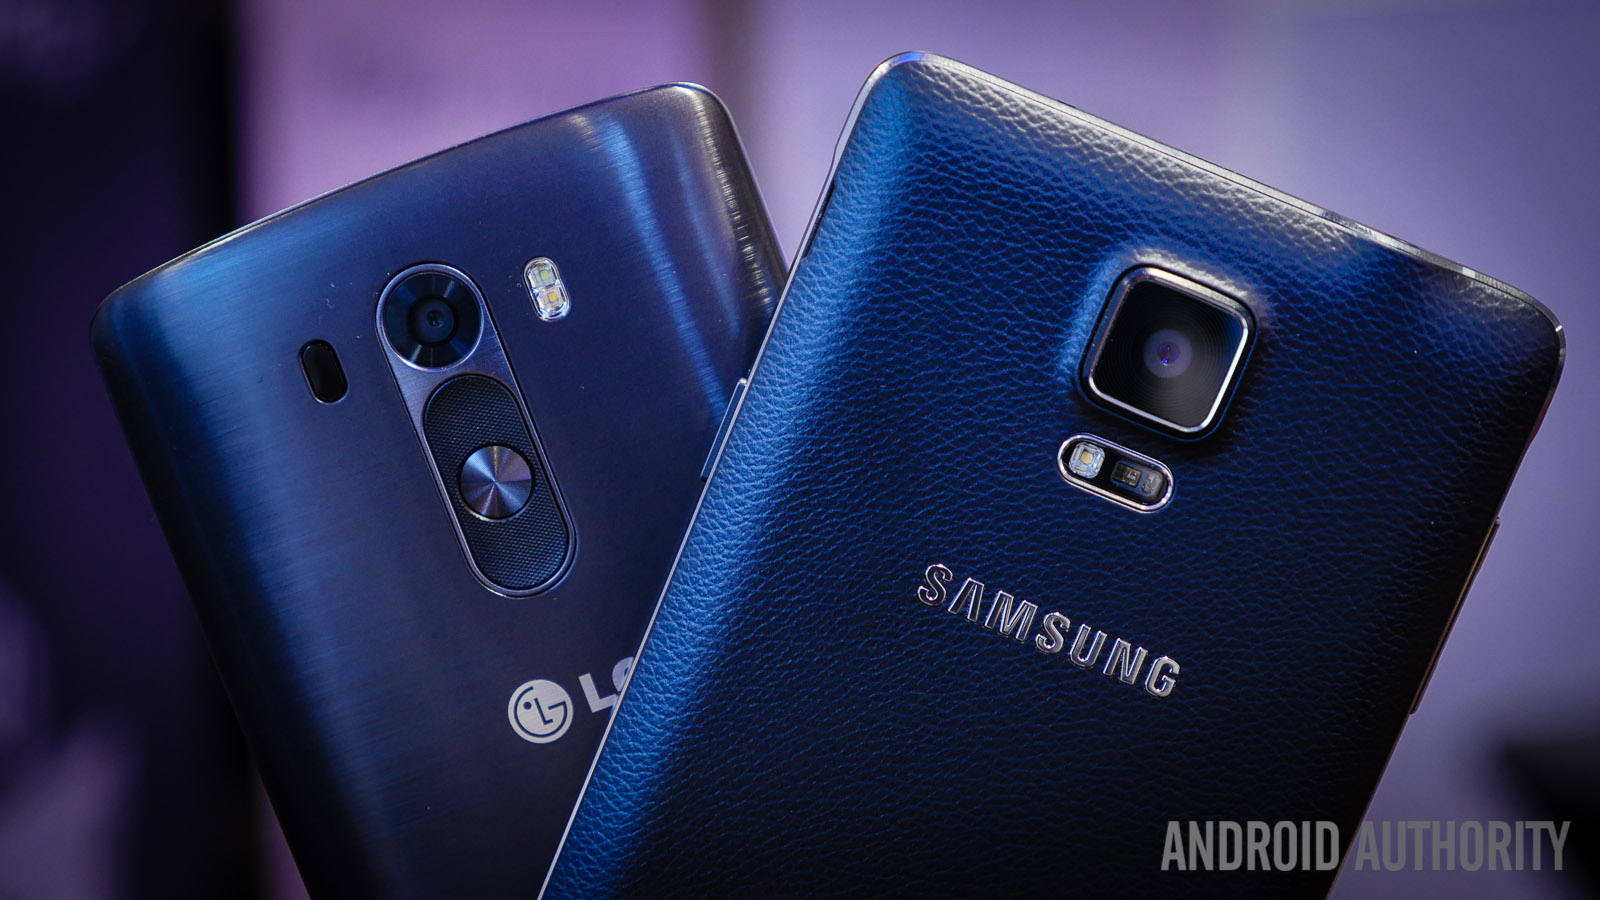 samsung galaxy note 4 vs lg g3 quick look aa (1 of 2)